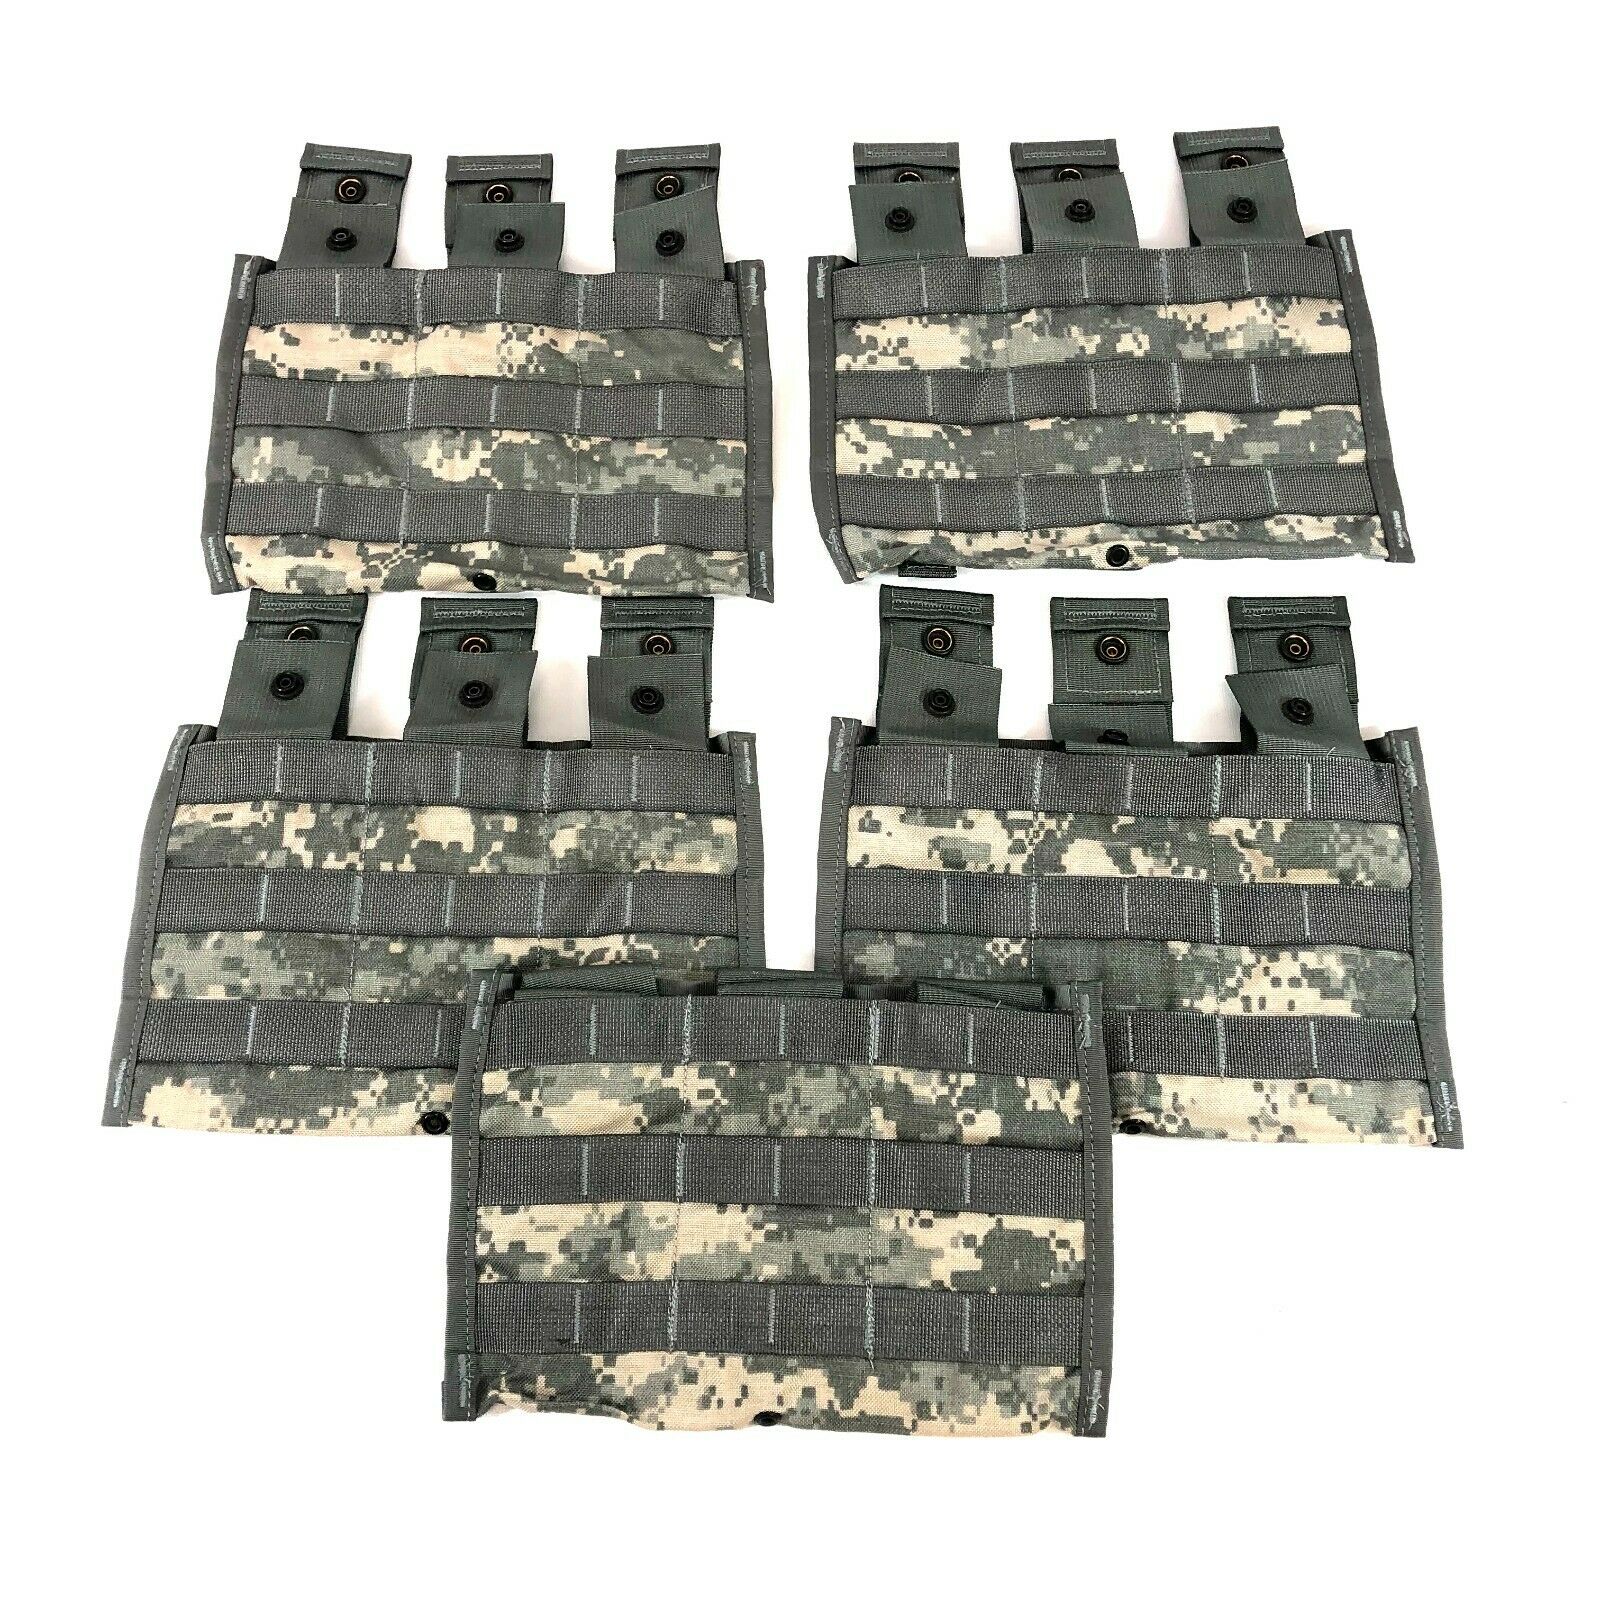 5 Acu Triple Magazine Pouch, Molle Military Tactical Camo Mag Pouches Usgi Army